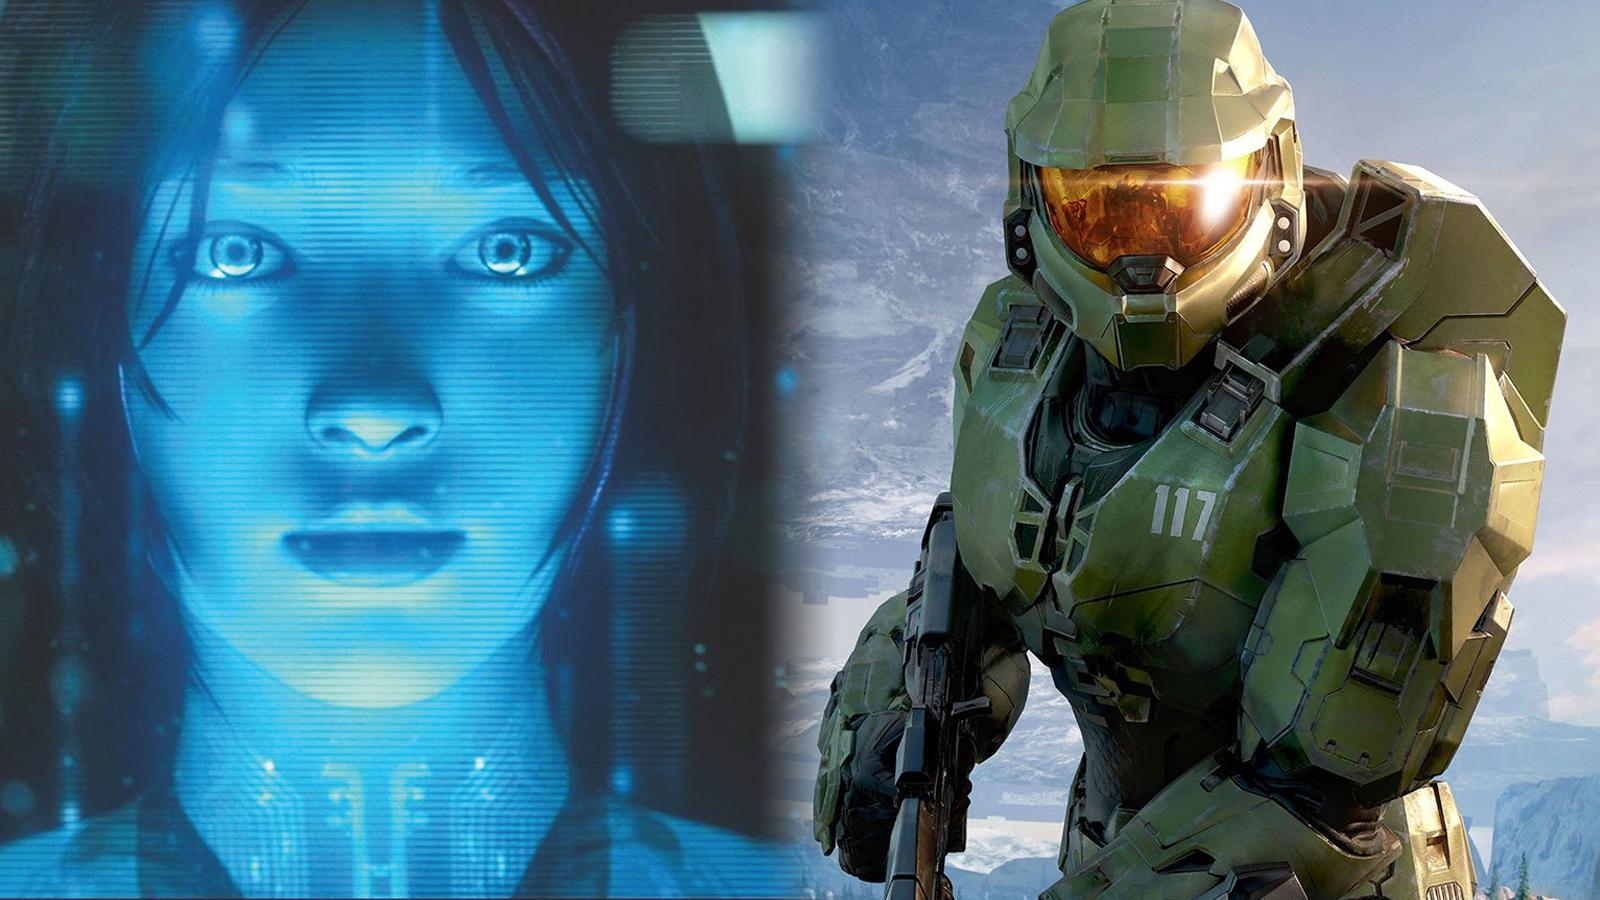 New Covenants Introduced In Halo TV Series: Here's What We Know